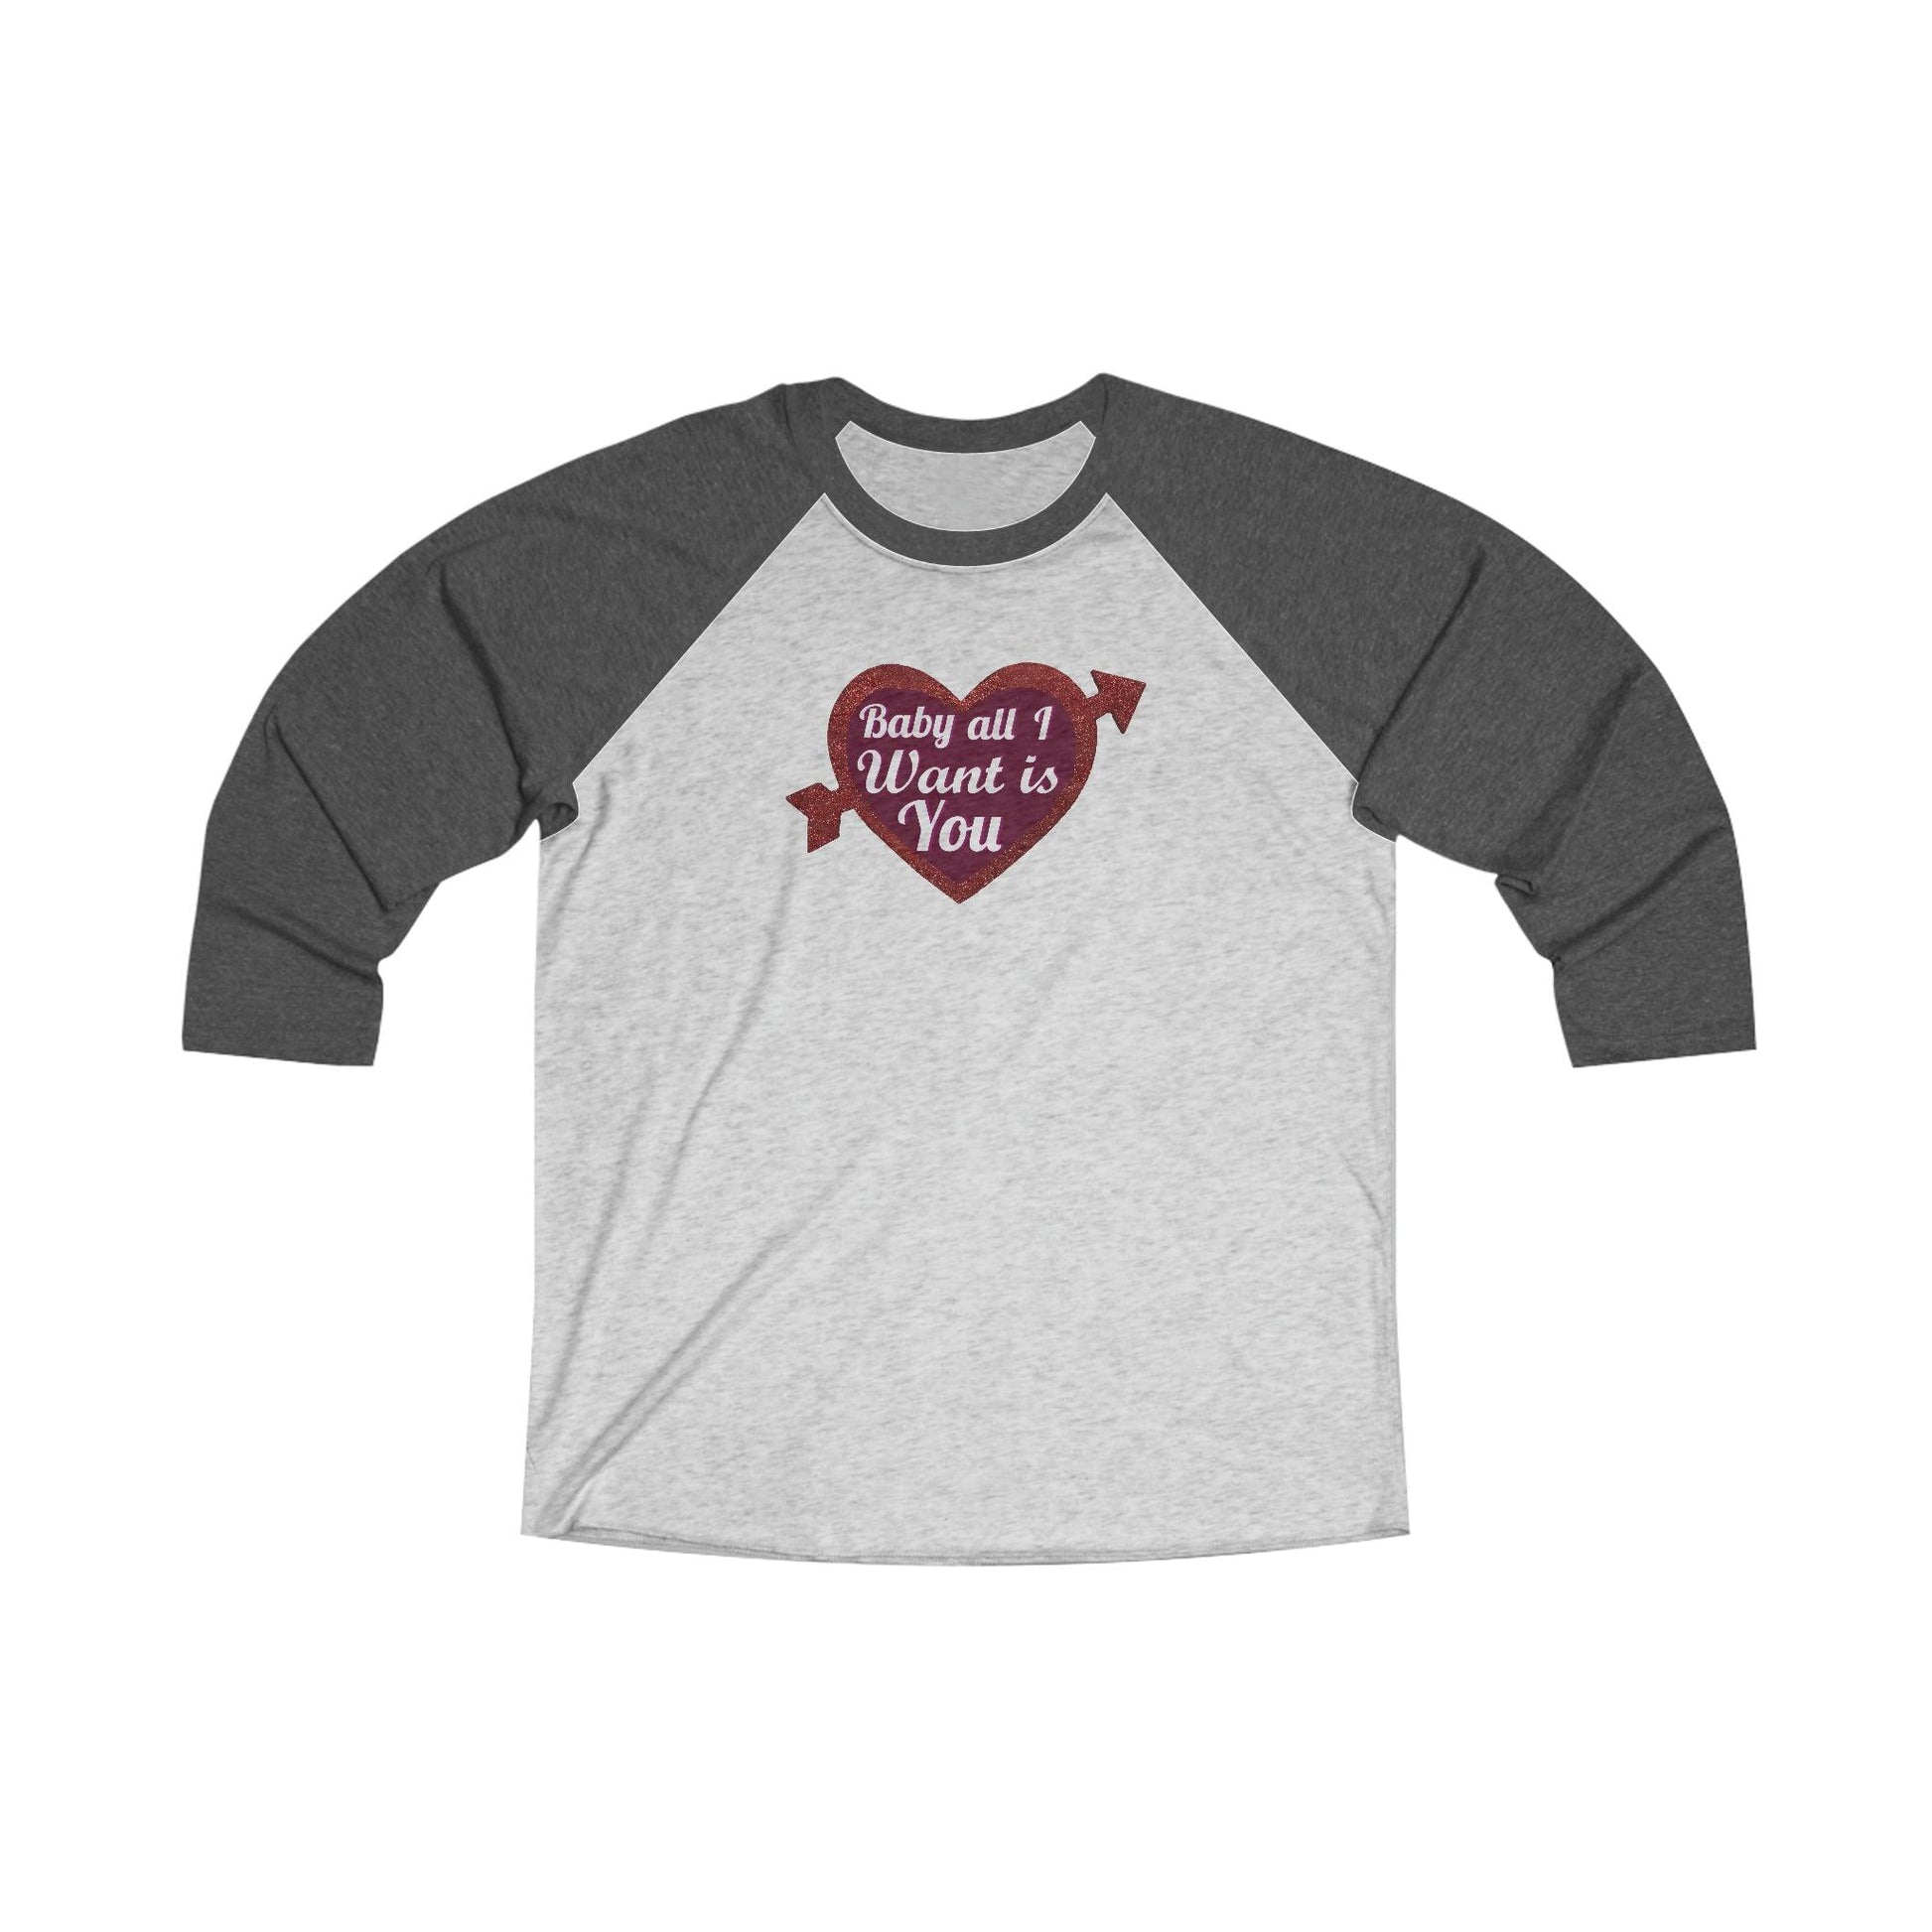 Baby All I Want is You Tri-Blend 34 Raglan Tee - Giftsmojo